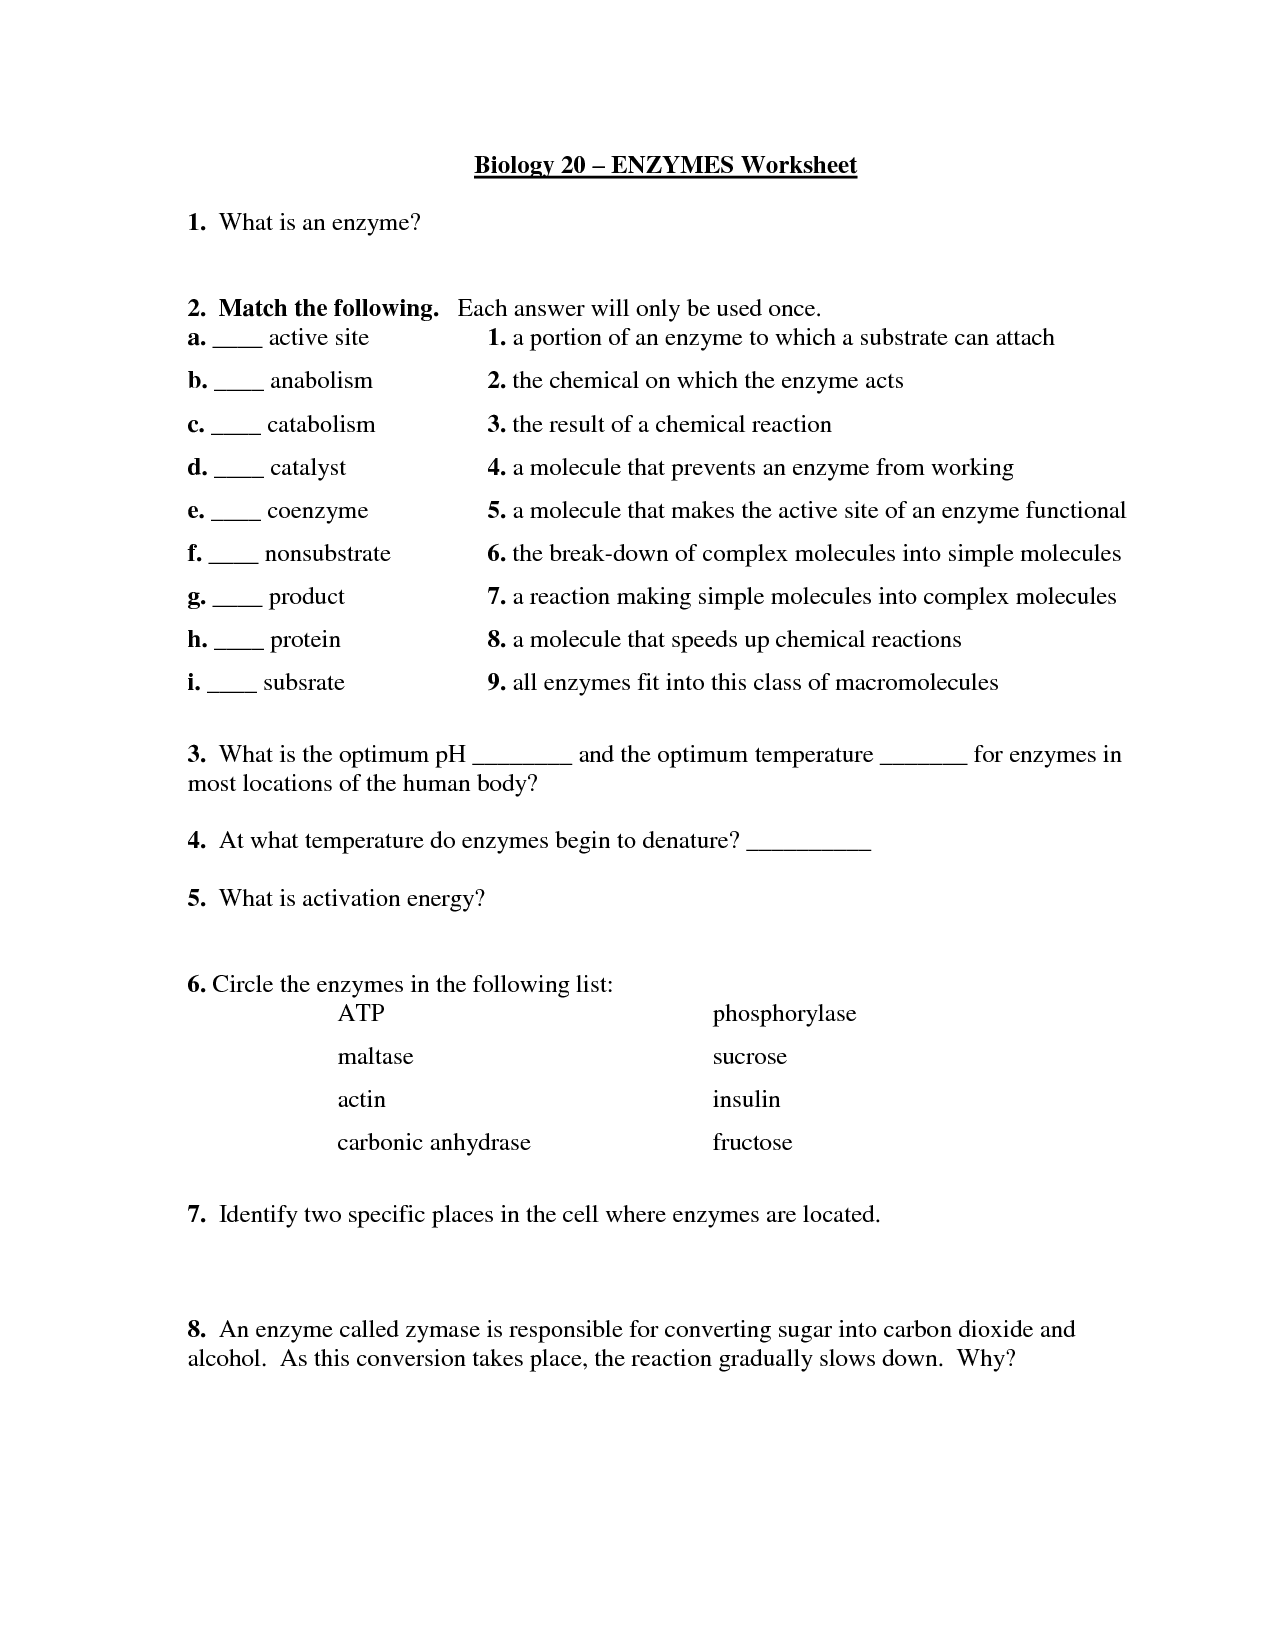 Biology Worksheets with Answers